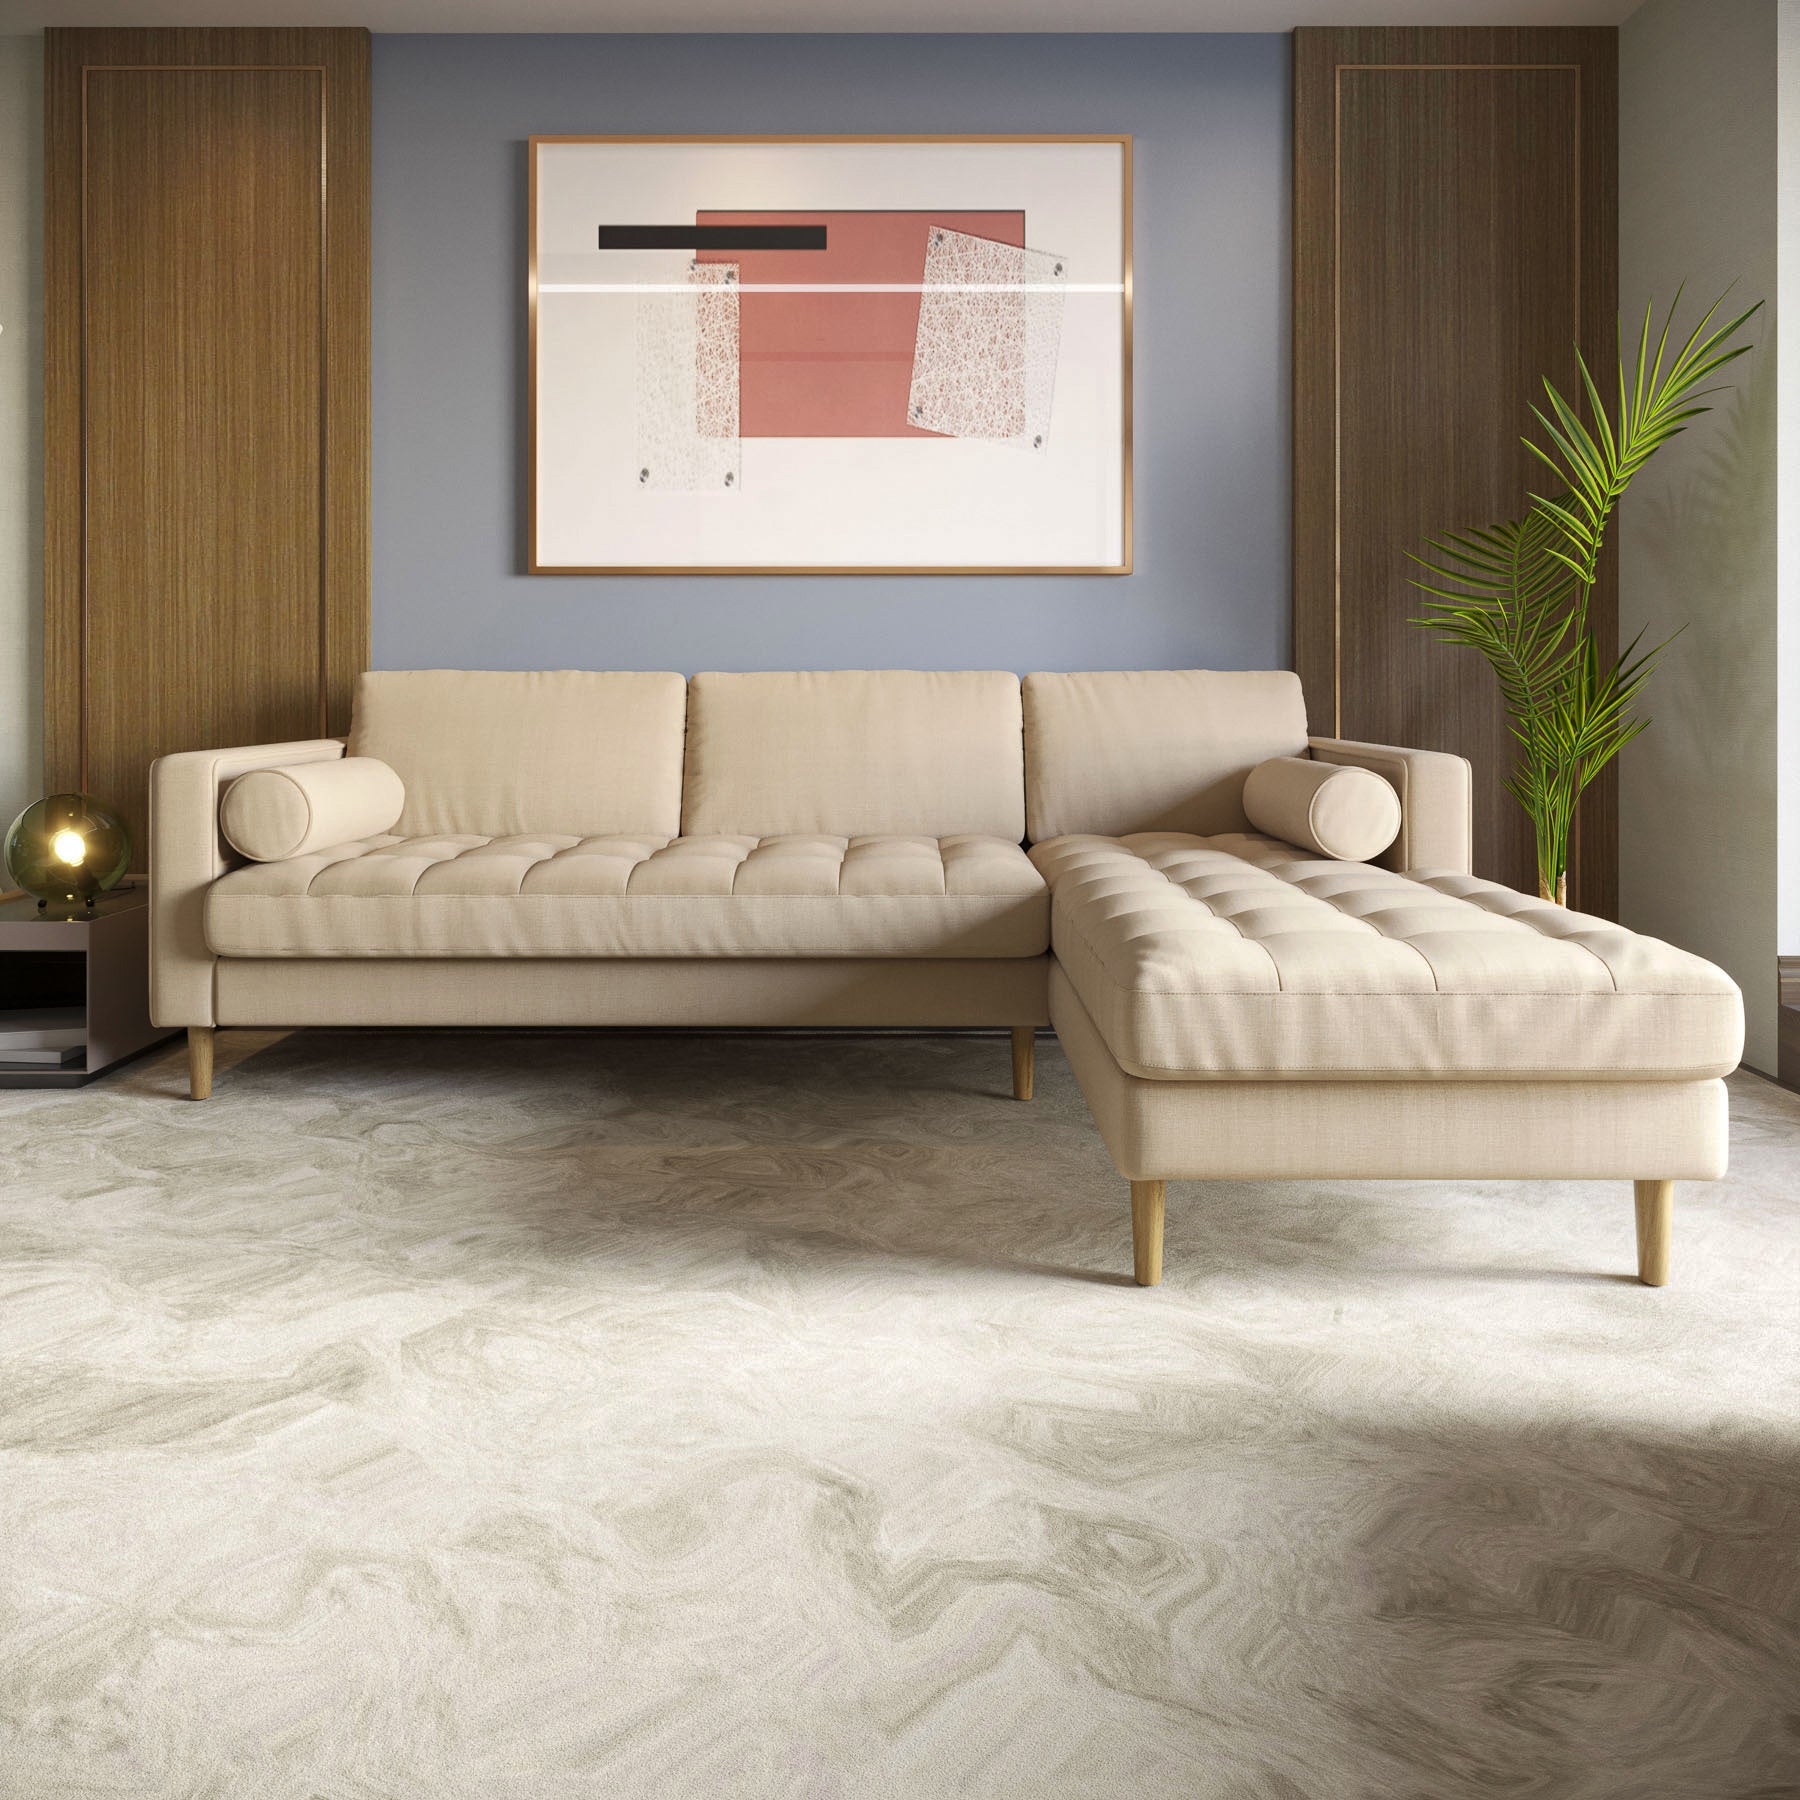 abalone-grey left-sectional